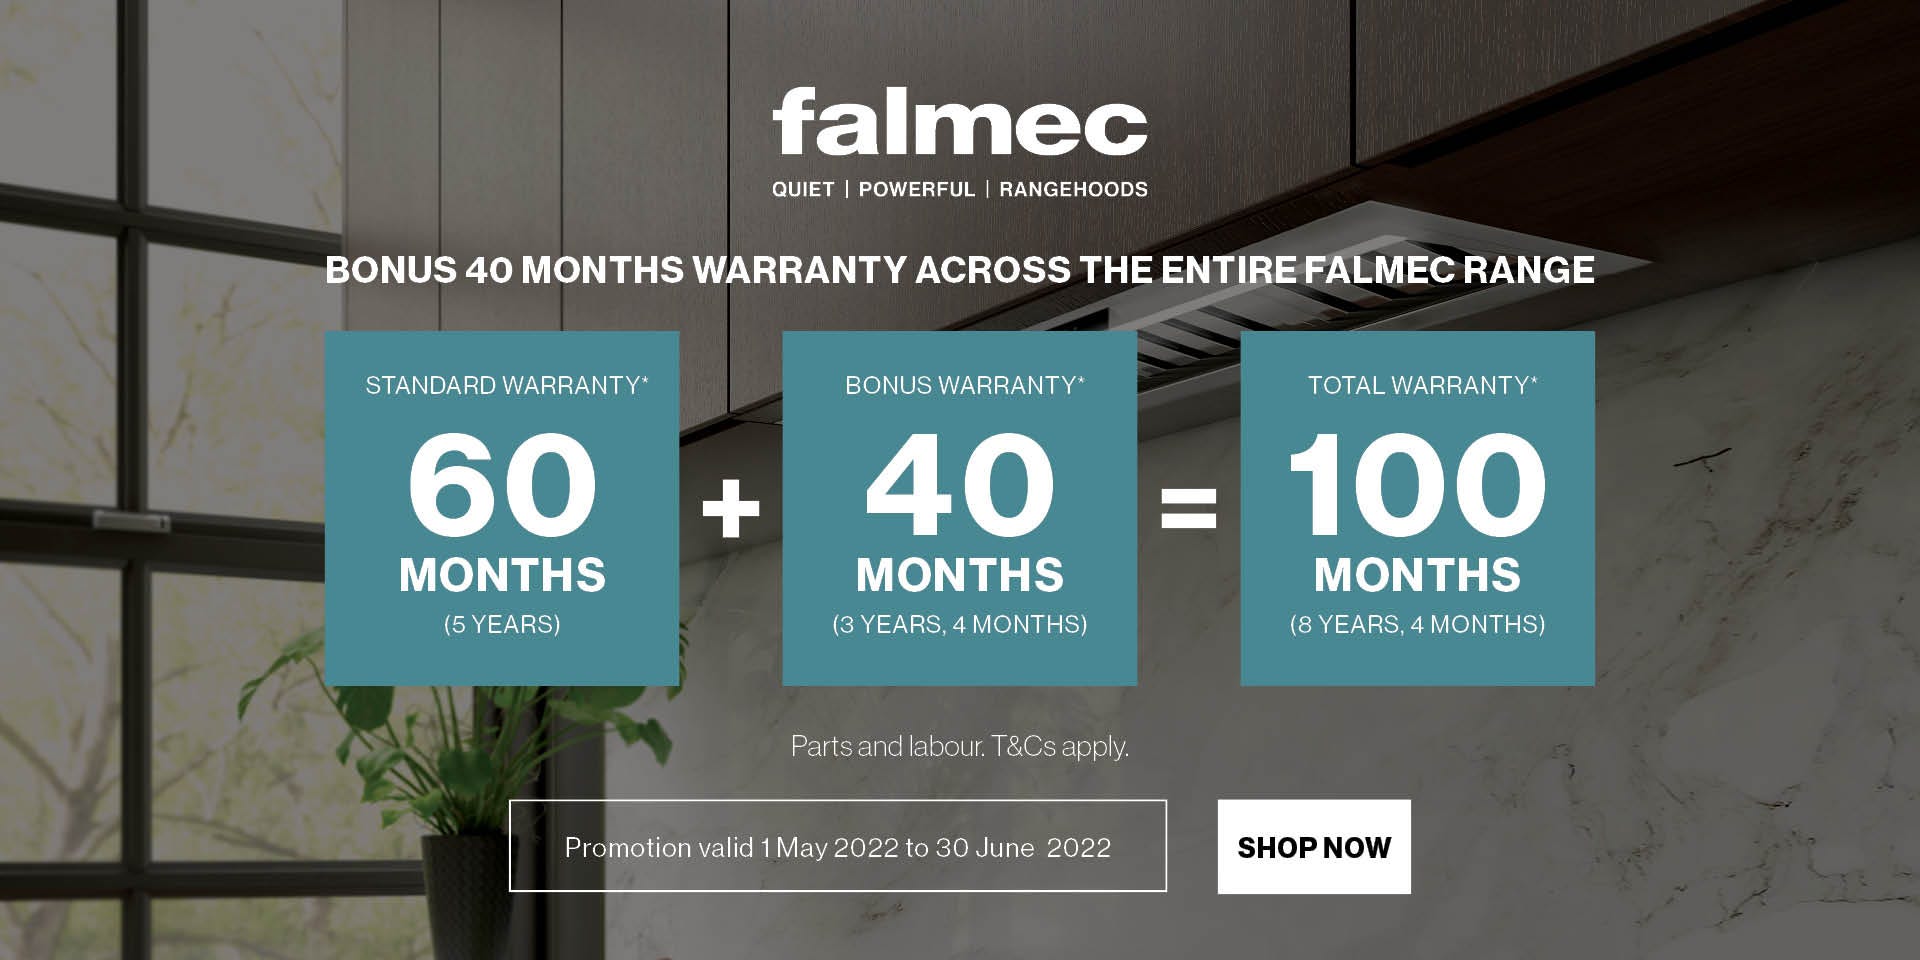 Get a bonus 40 months extended warranty* on Falmec undermount, canopy & slideout rangehoods. Offer ends 30/06/22. Find out more at an e&s near you today.